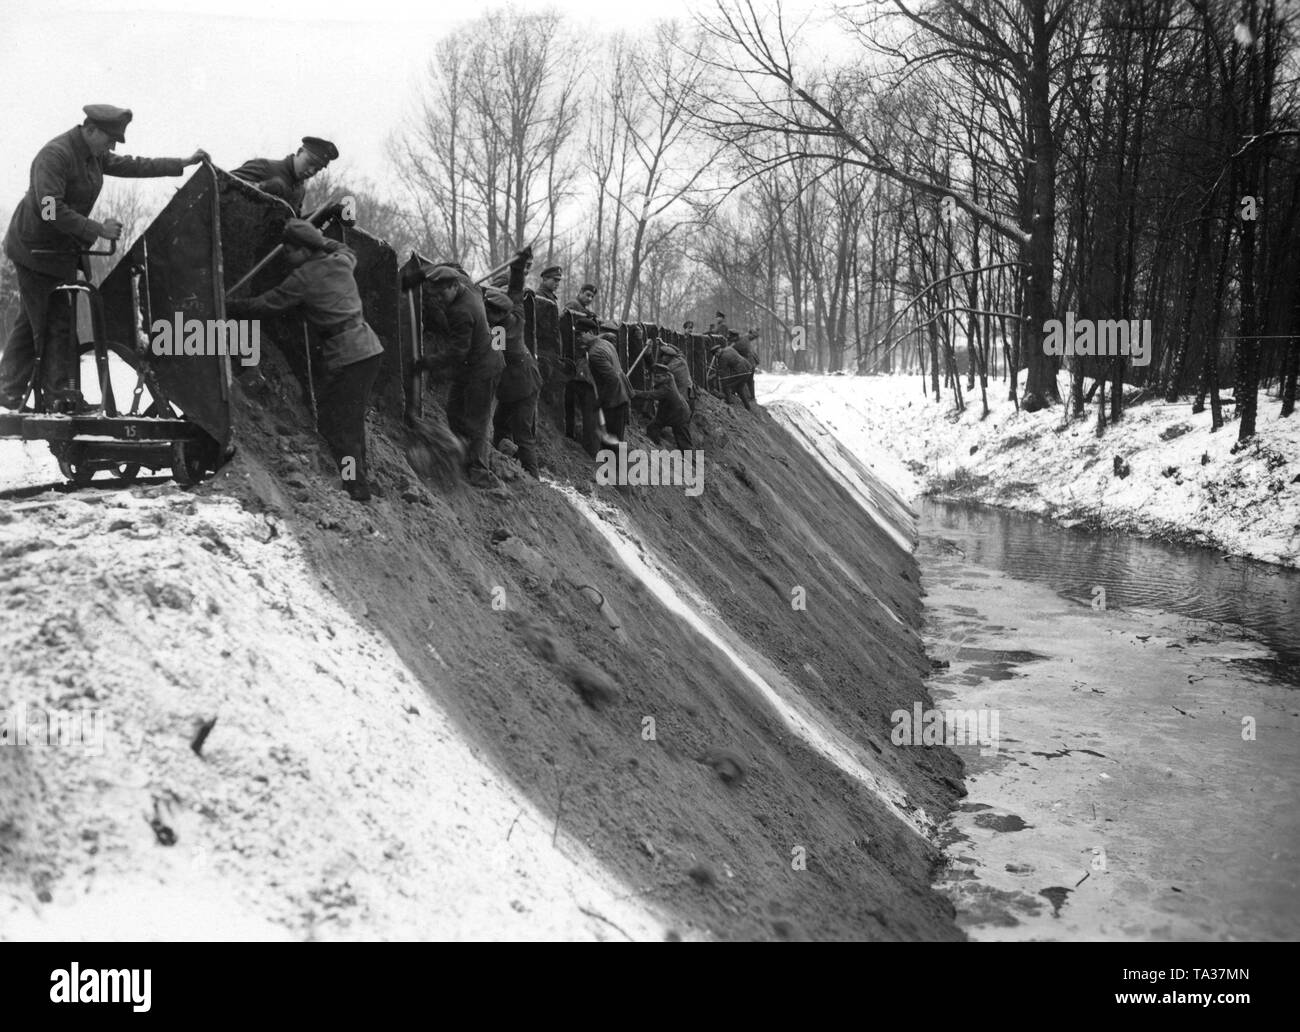 Men of the Voluntary Work Service of the Stahlhelm are filling up a brook or a swamp with soil presumably for the Reichsforschungsiedlung Haselhorst near Berlin-Spandau. Stock Photo